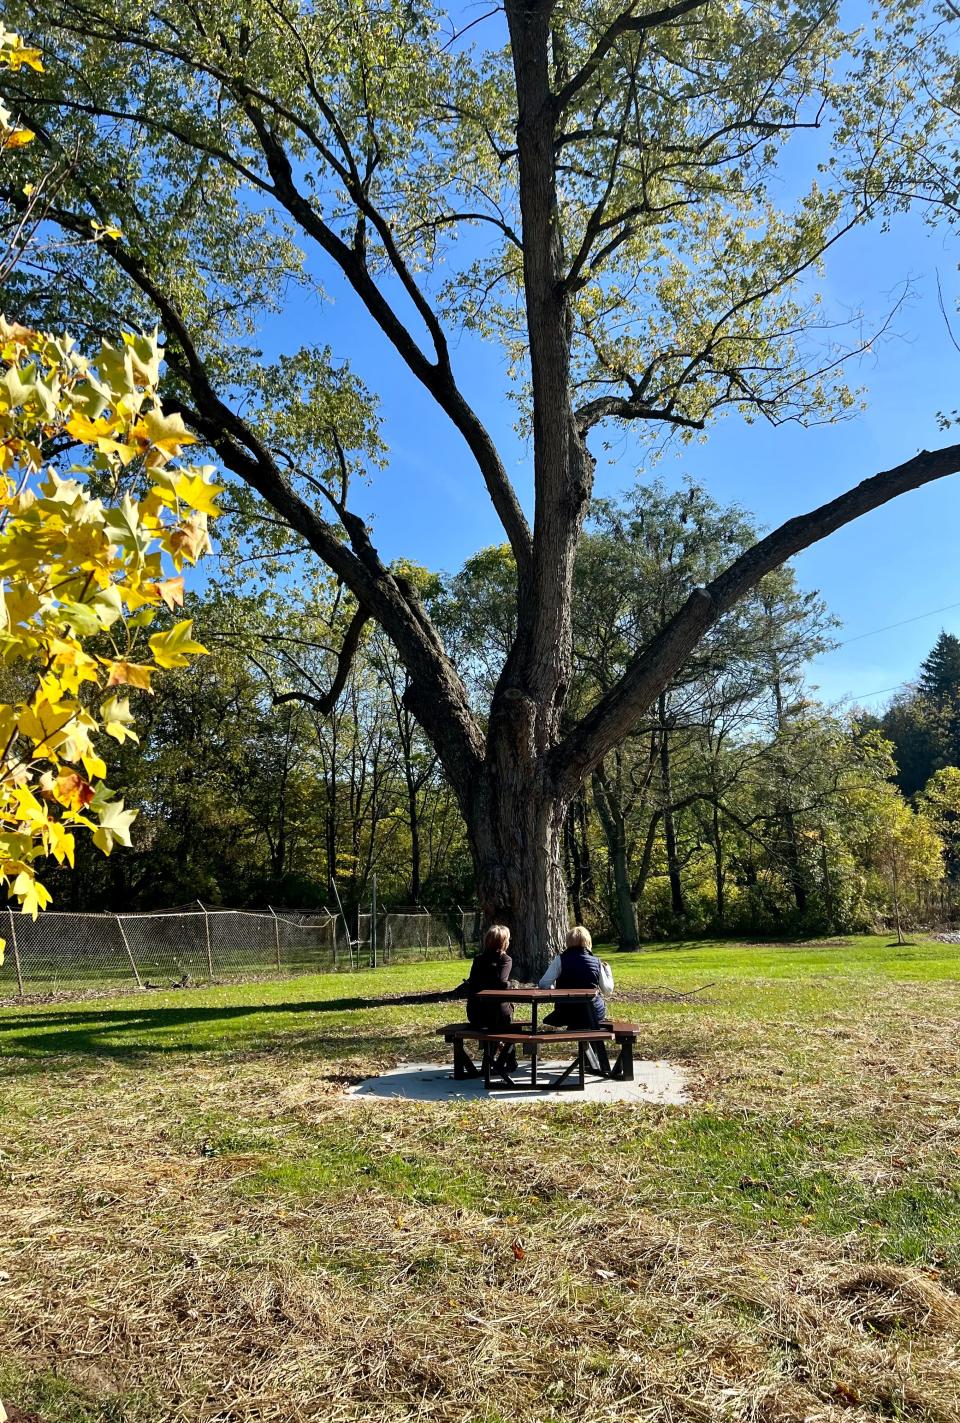 On a recent fall day, two women enjoy the new picnic table at Deer Park.